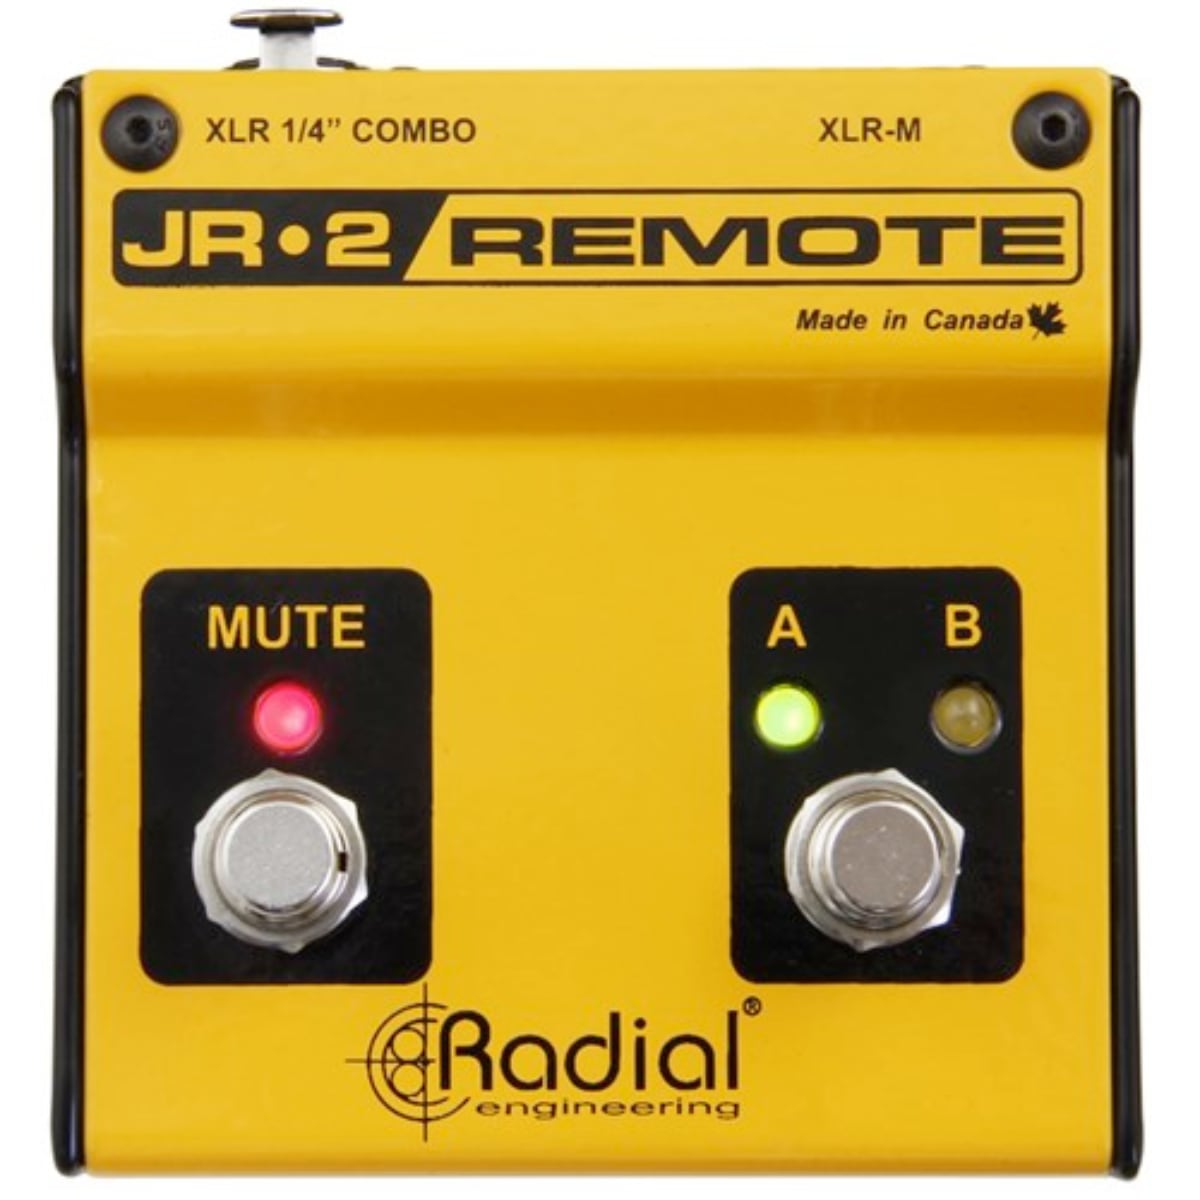 Radial Engineering JR-2 Remote Control A/B Input SELECT AND MUTE